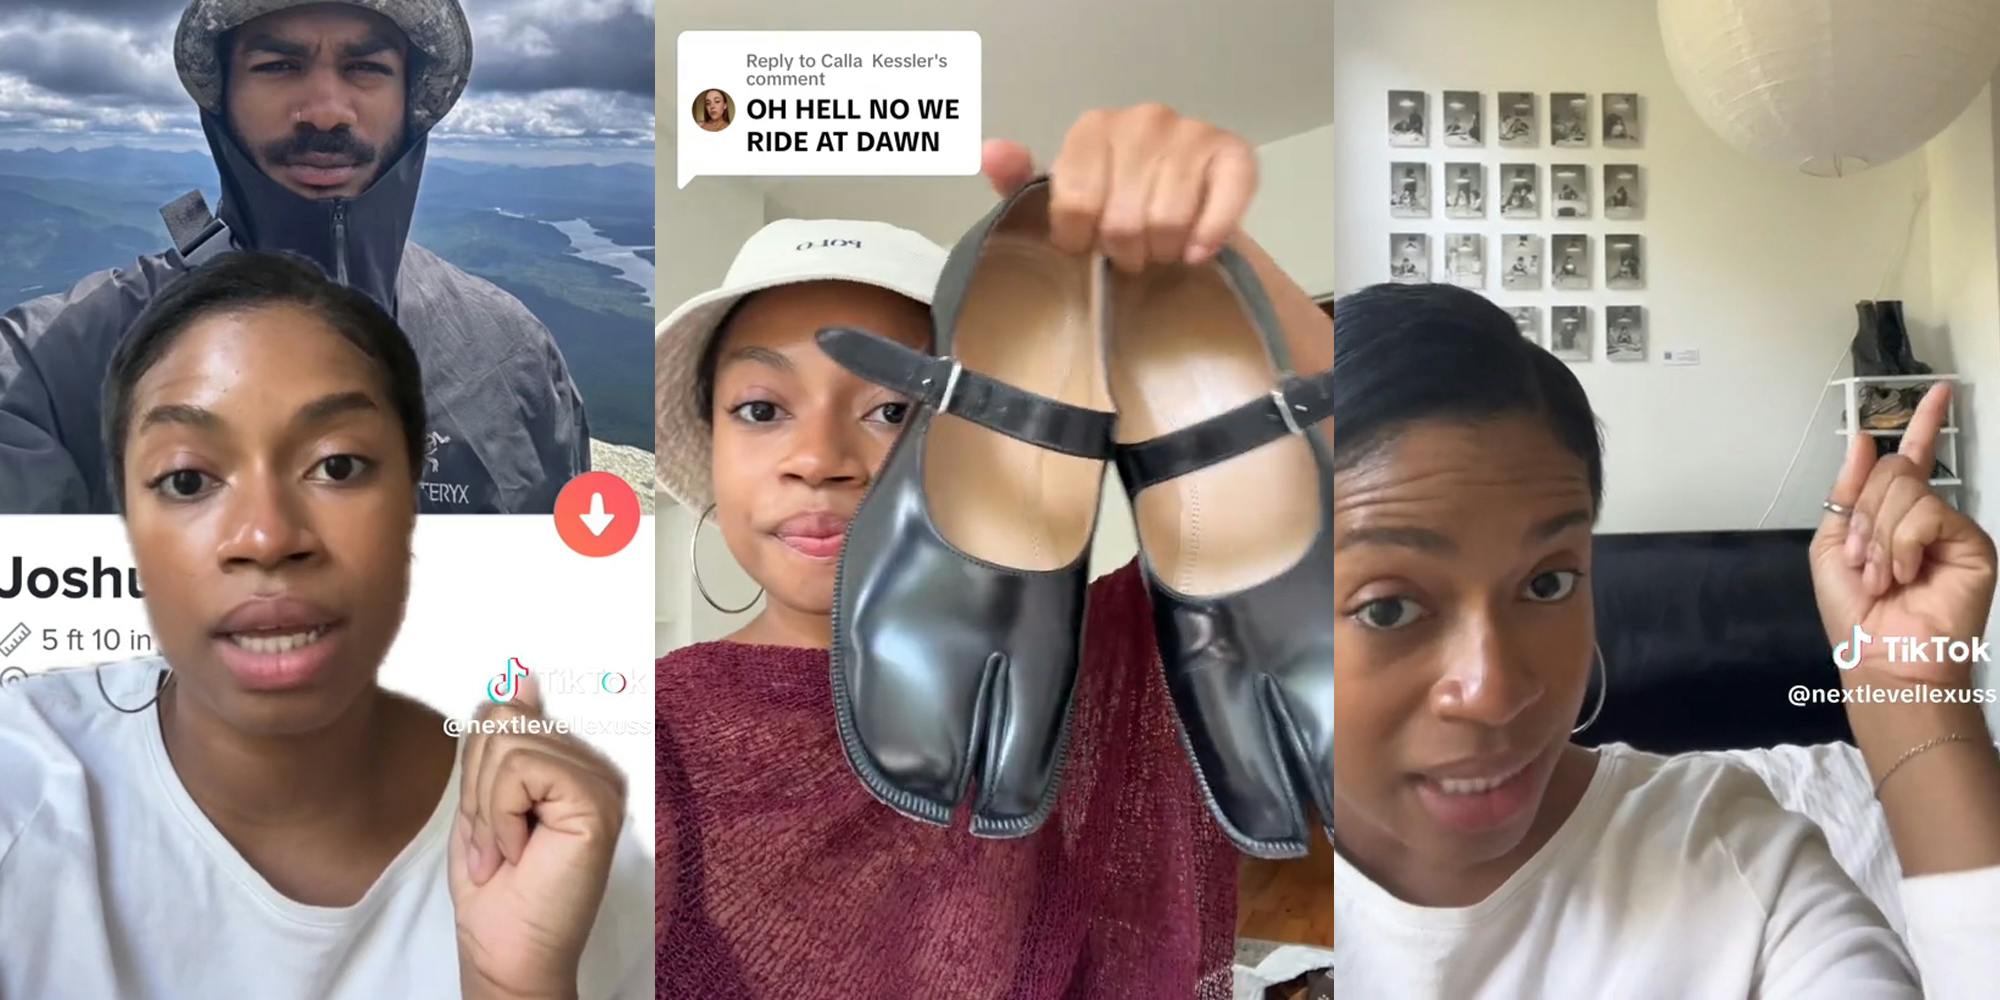 woman greenscreen TikTok over man's dating profile (l) woman holding shoes with caption "OH HELL NO WE RIDE AT DAWN" (c) woman pointing to shoe rack (r)